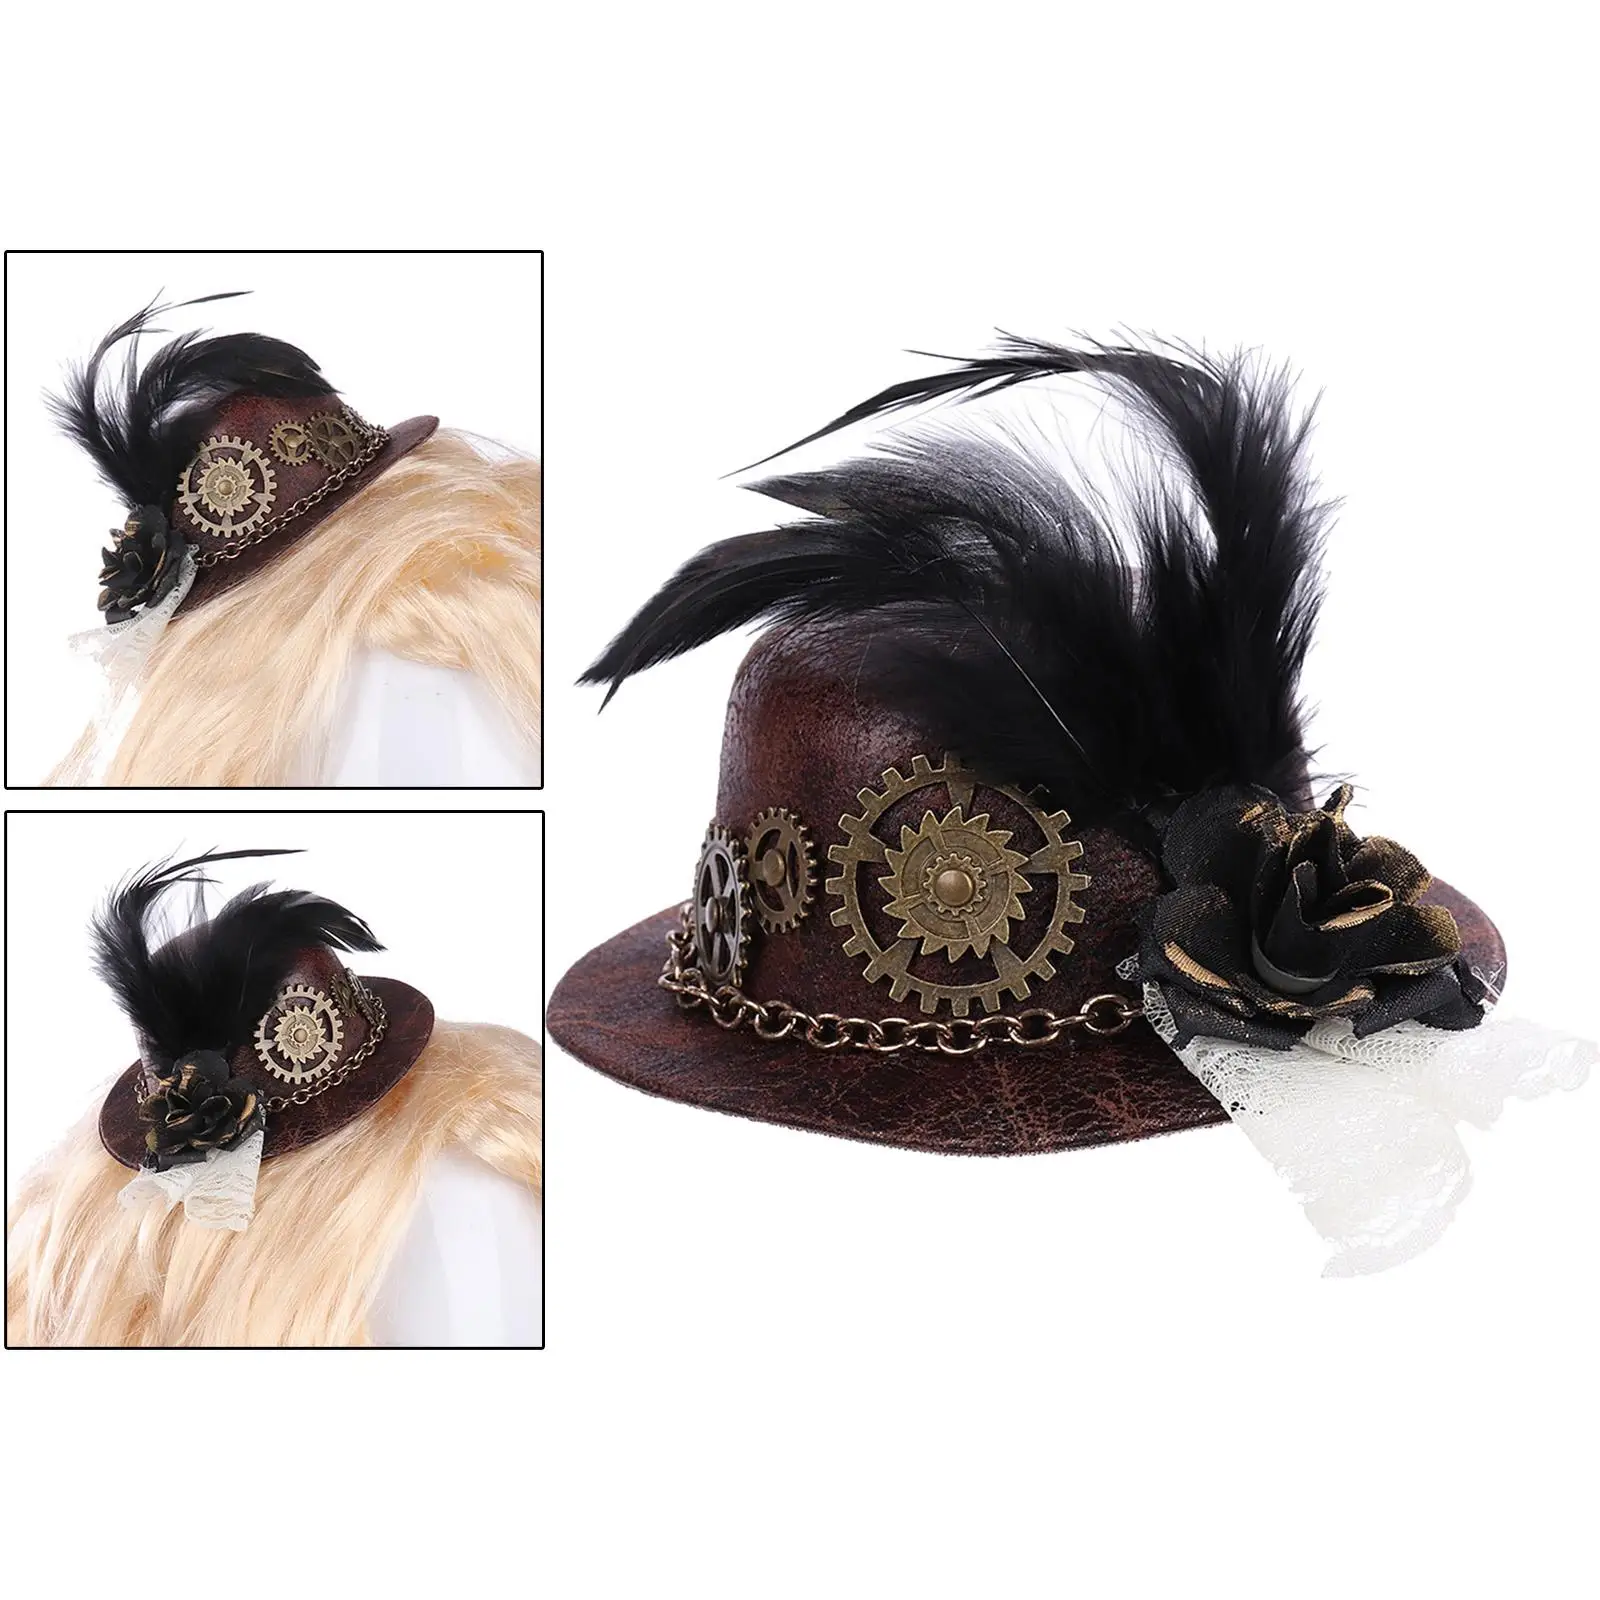 Goth Steampunk Mini Top Hat with Gear Feather Hair Clip, Jazz Hat Cosplay Costume Hat Renaissance Costume Halloween Accessory